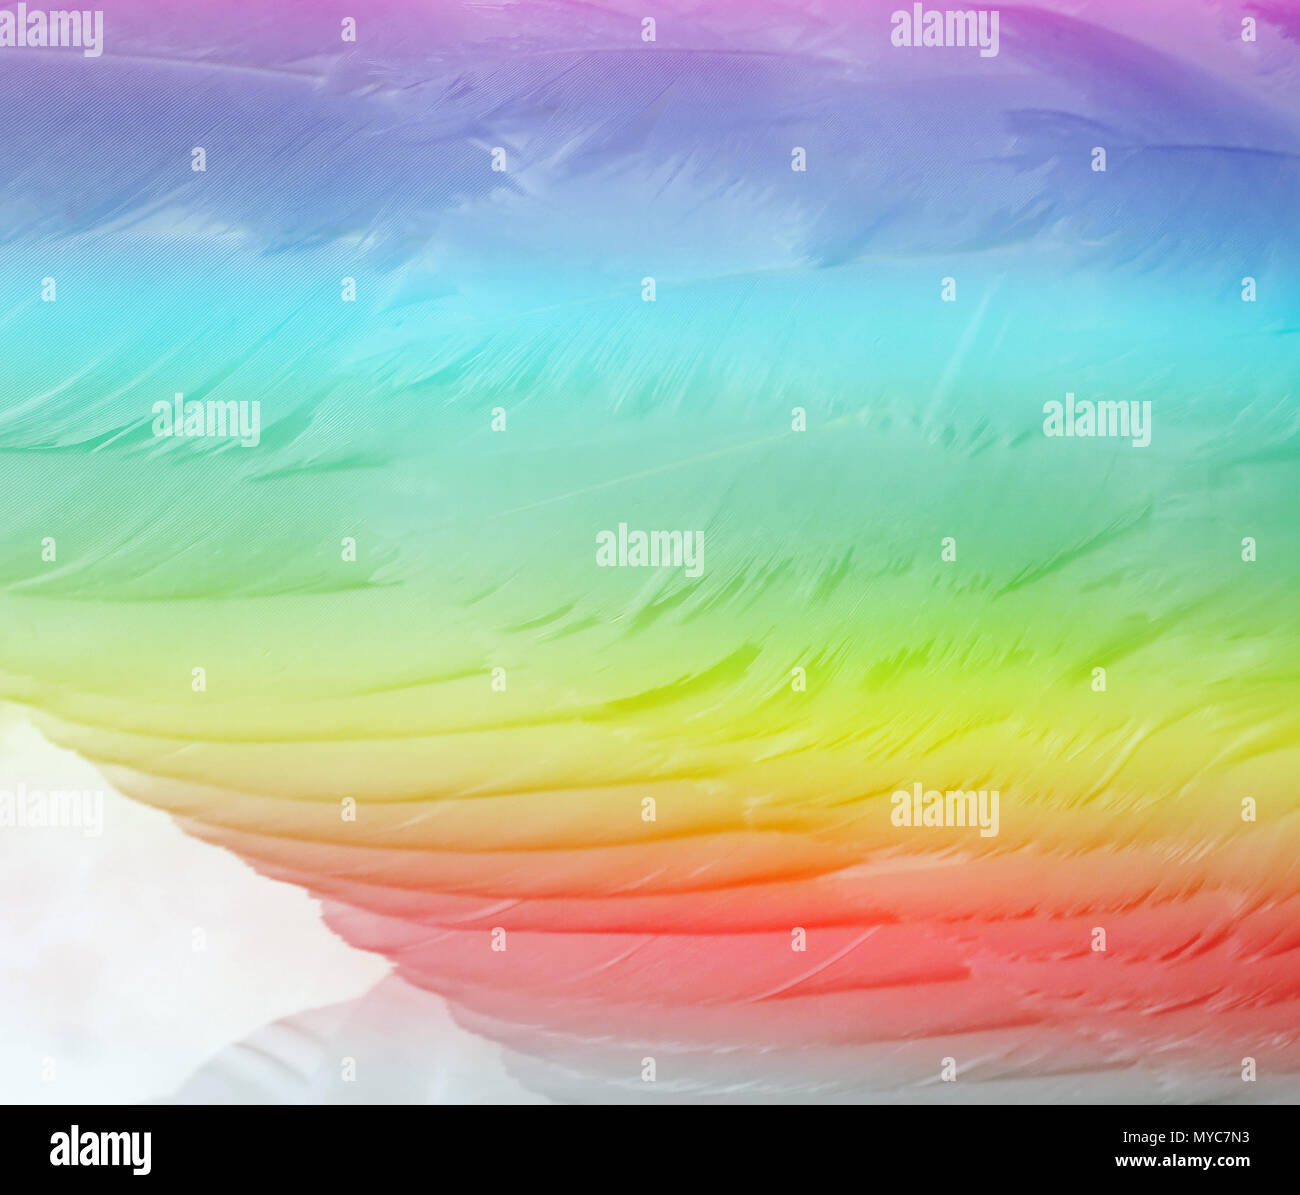 Layers of soft swan feathers with abstract rainbow colors Stock Photo